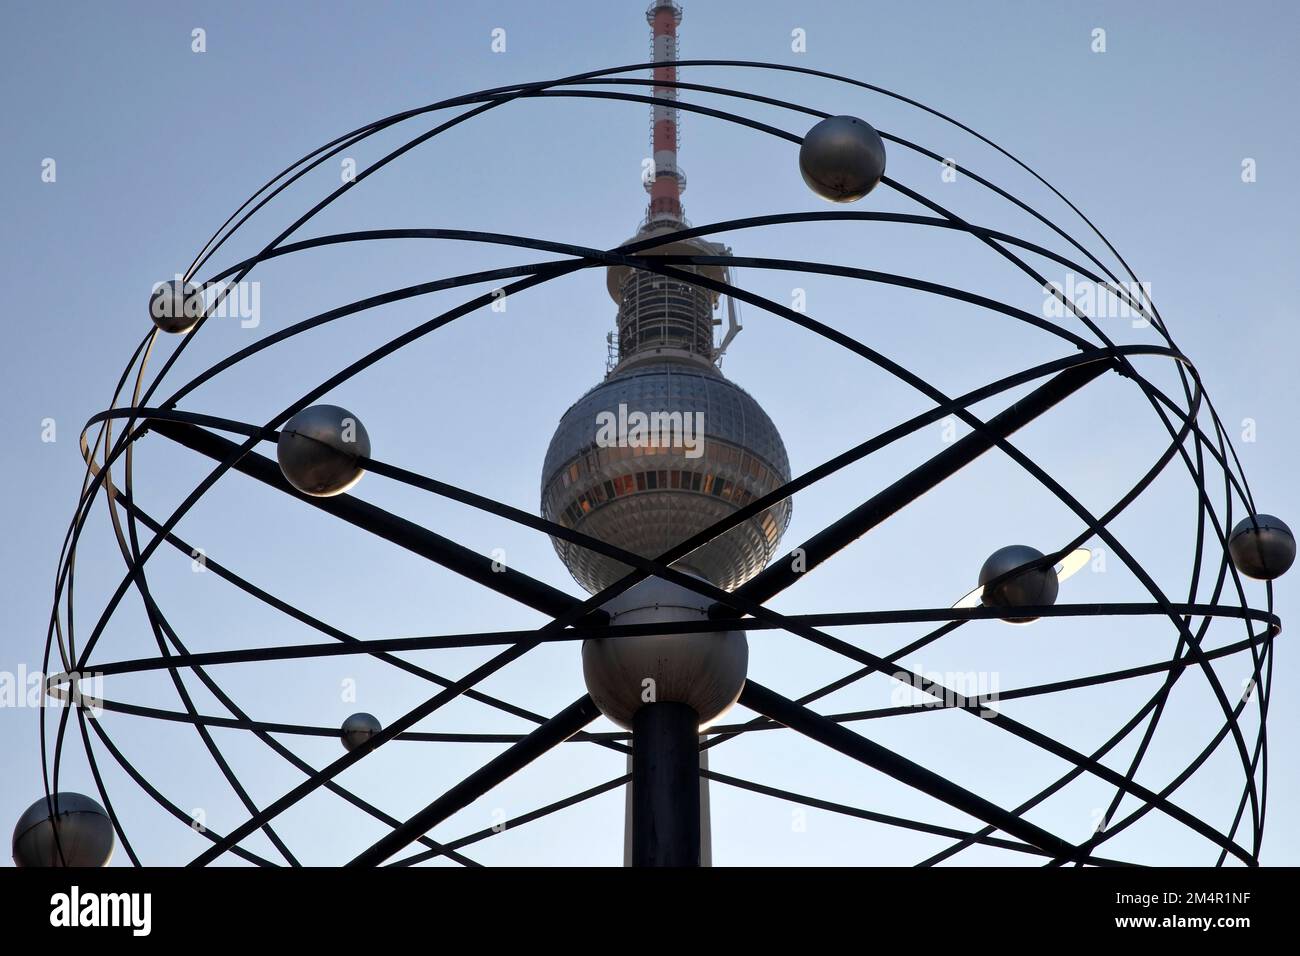 Planetary model of the Urania world time clock with television tower, Alexanderplatz, Berlin Mitte, Berlin, Germany Stock Photo